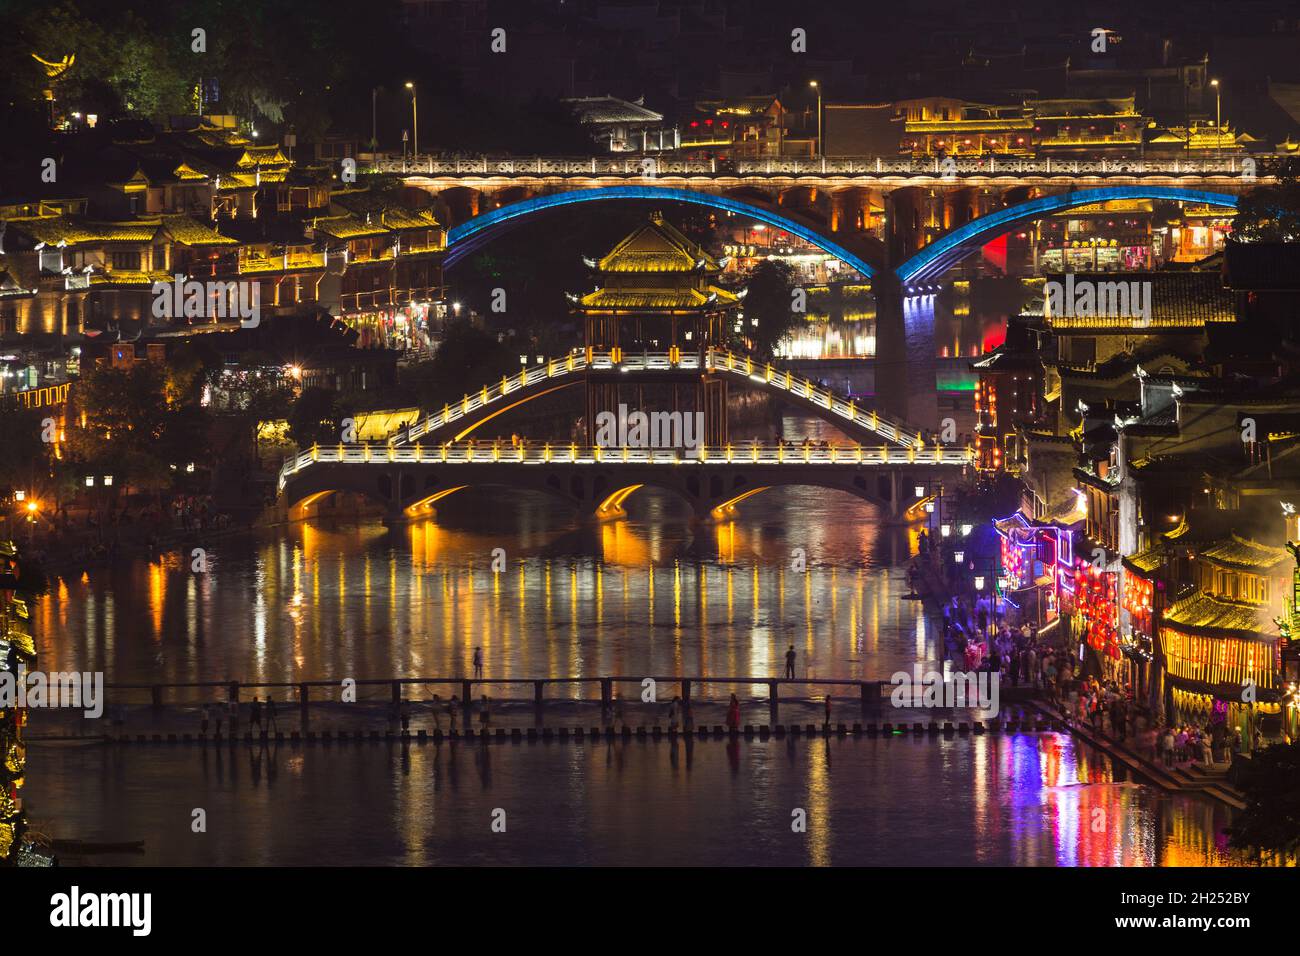 The Fenghuang Bridge and highway bridge over the Tuojiang River, lit at night.  Fenghuang, China. Stock Photo